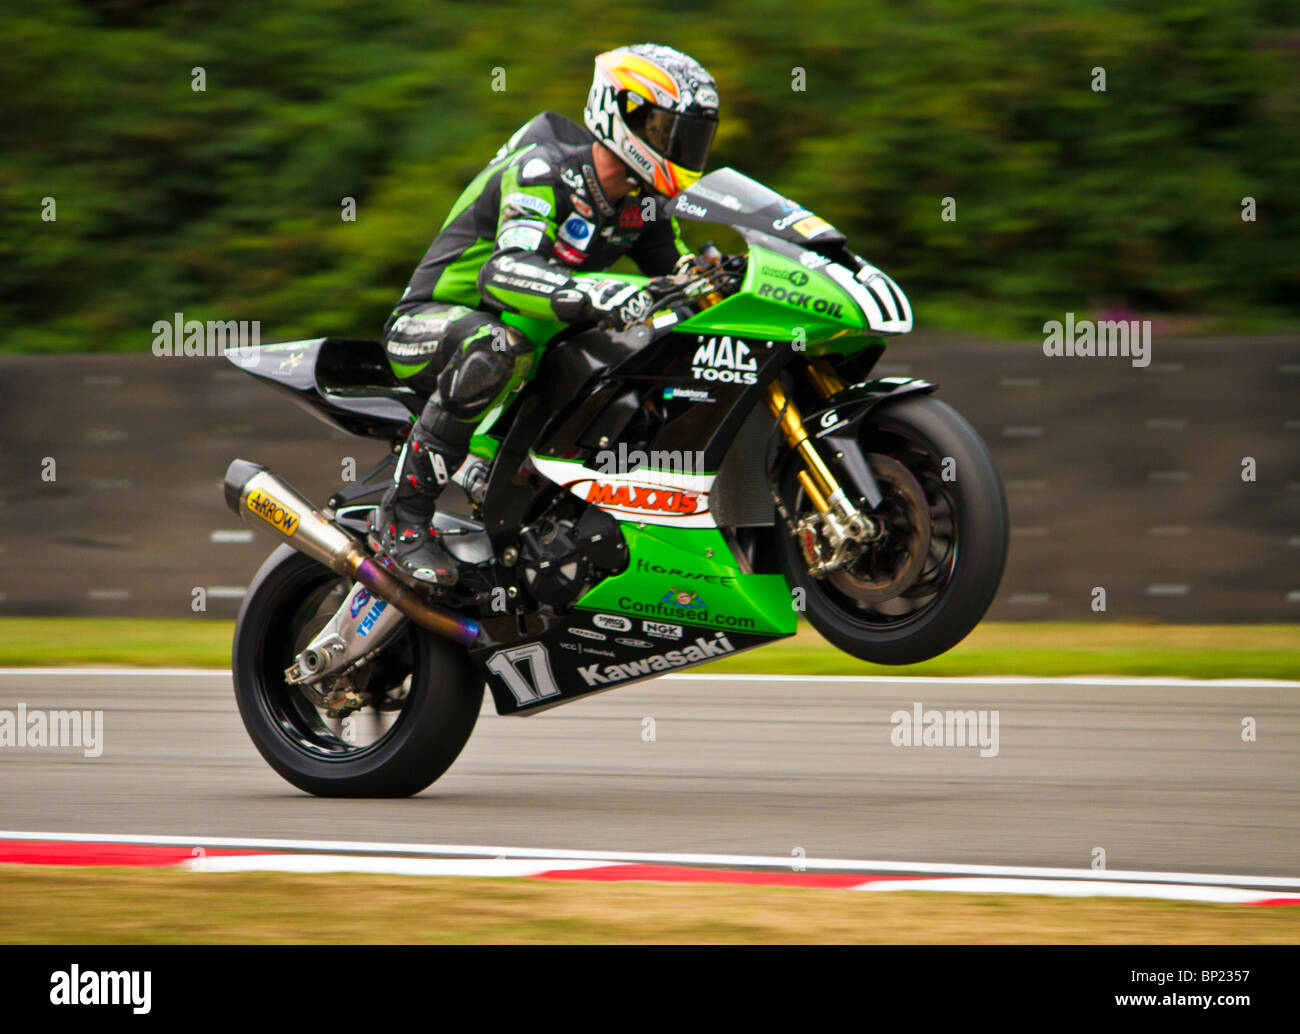 Simon Andrews of MSS COLCHESTER superbike race team on his KAWASAKI  NInja  ZX-10R pulling a wheelie at Brands Hatch GP Circuit. Stock Photo